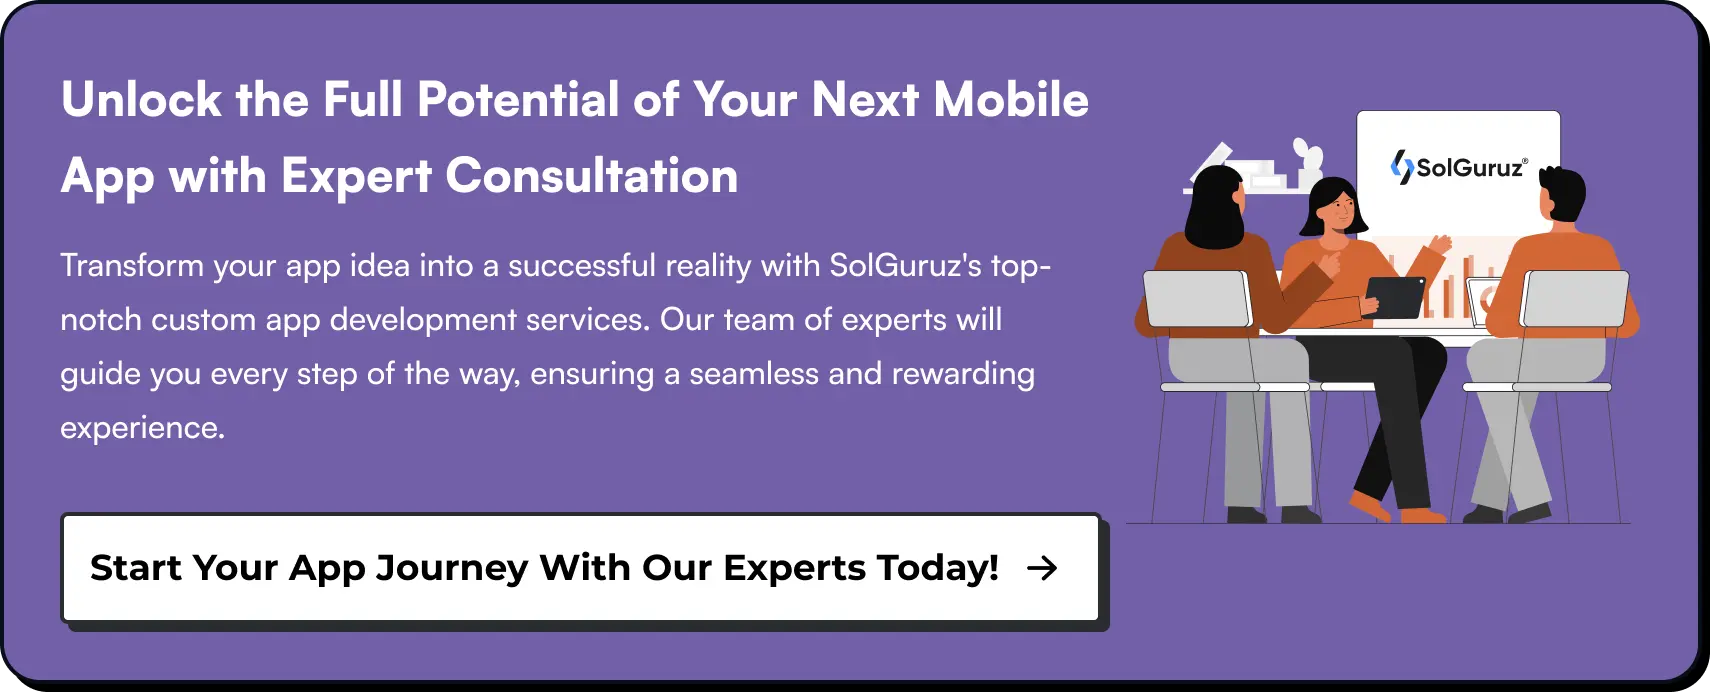 Unlock the Full Potential of Your Next Mobile App with Expert Consultation